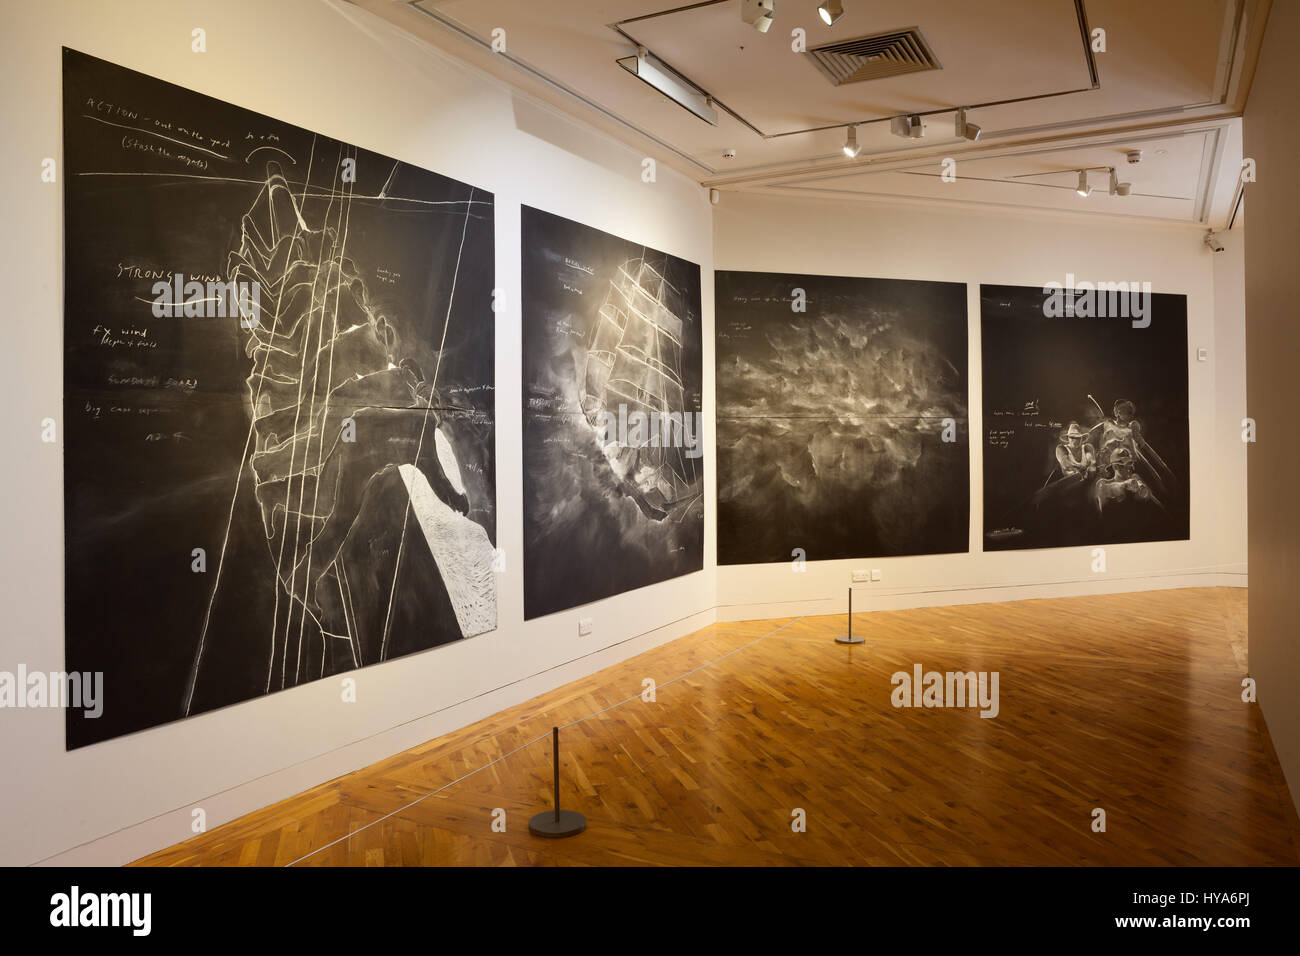 Hull, East Yorkshire, UK. 3rd April 2017. The first ever joint exhibition between Hull’s Ferens Art Gallery and Maritime Museum. 'Offshore: Artists Explore the Sea' features ten new commissions from leading contemporary artists. Pictured is 'Roaring Forties: Seven Boards in Seven Days' by Tacita Dean. Credit: LEE BEEL/Alamy Live News Stock Photo